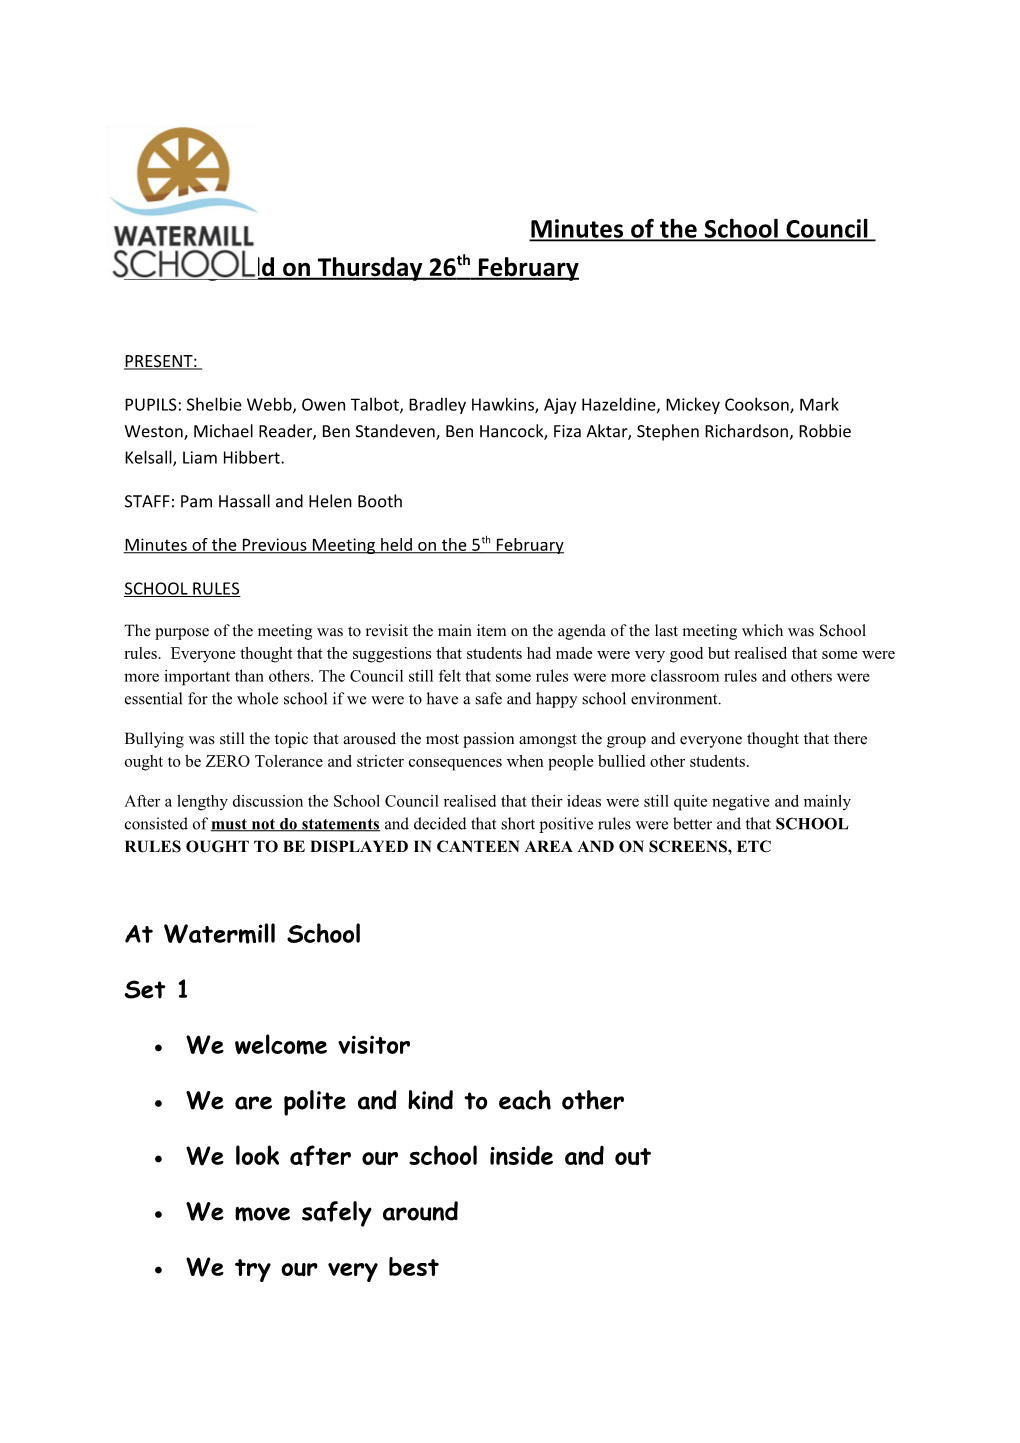 Minutes of the School Council Meeting Held on Thursday 26Th February